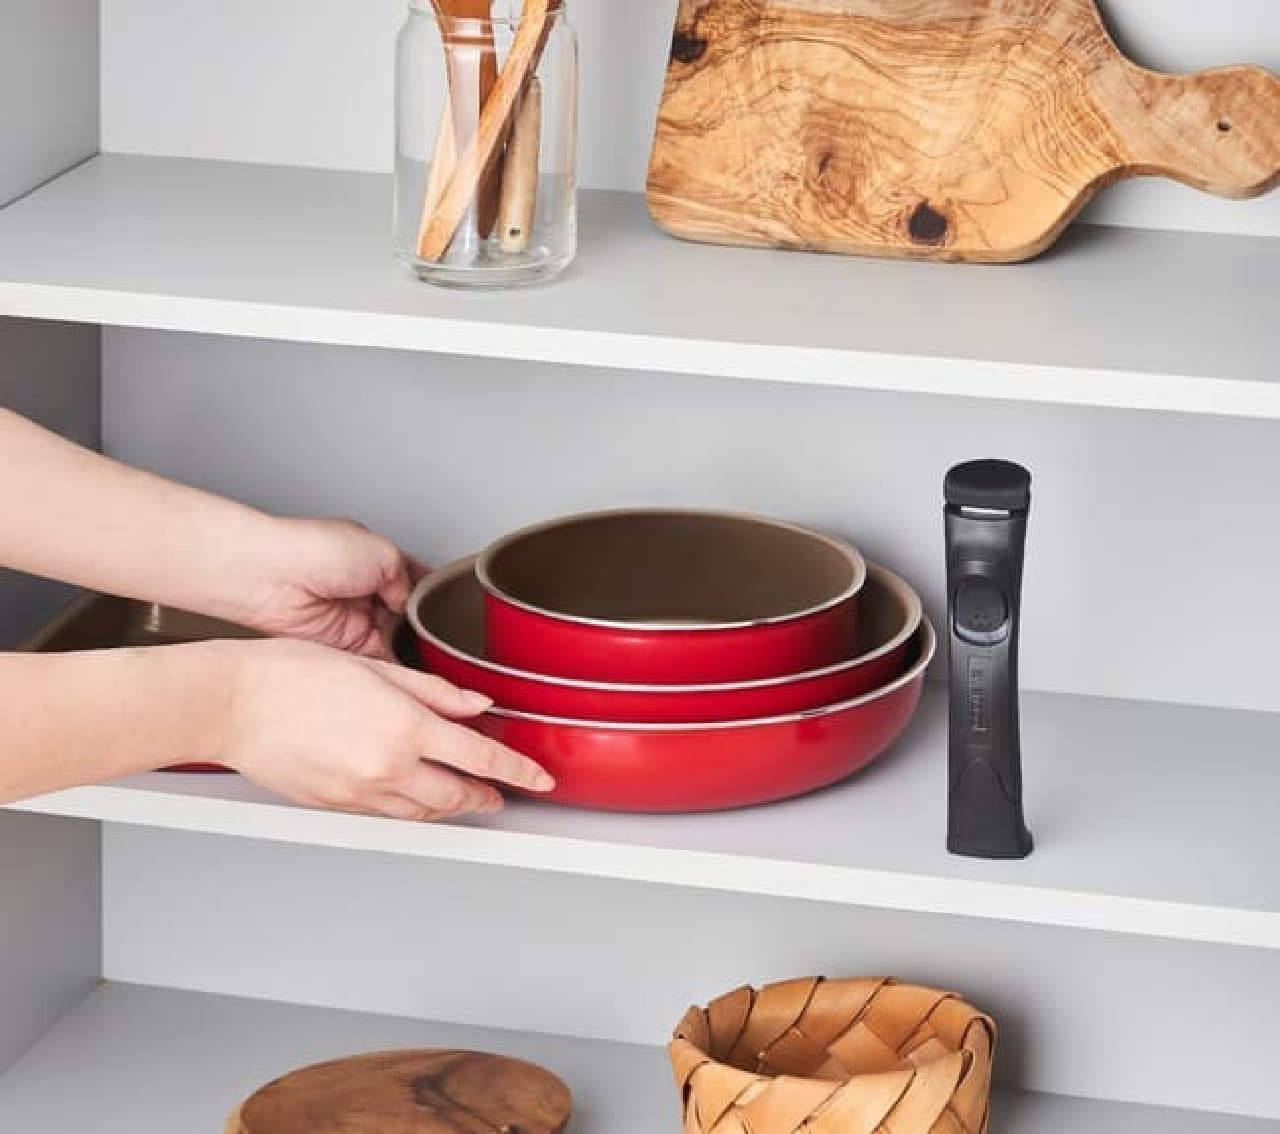 Removable frying pan and pot "evercook" released -- Compact storage and oven-safe! Slippery and comfortable to use